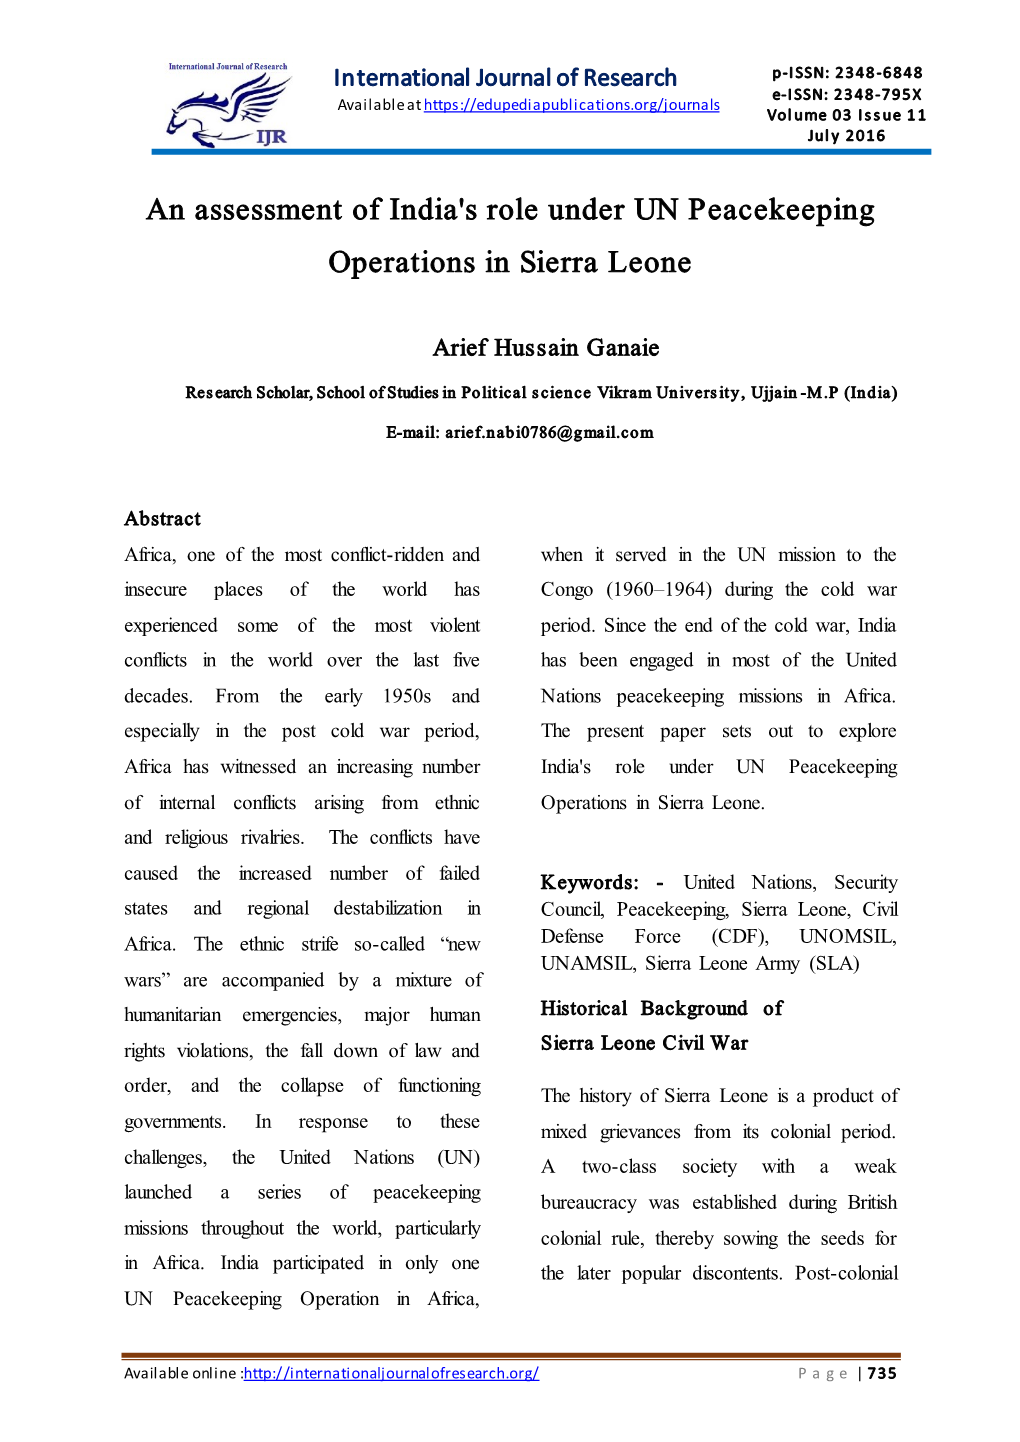 An Assessment of India's Role Under UN Peacekeeping Operations in Sierra Leone